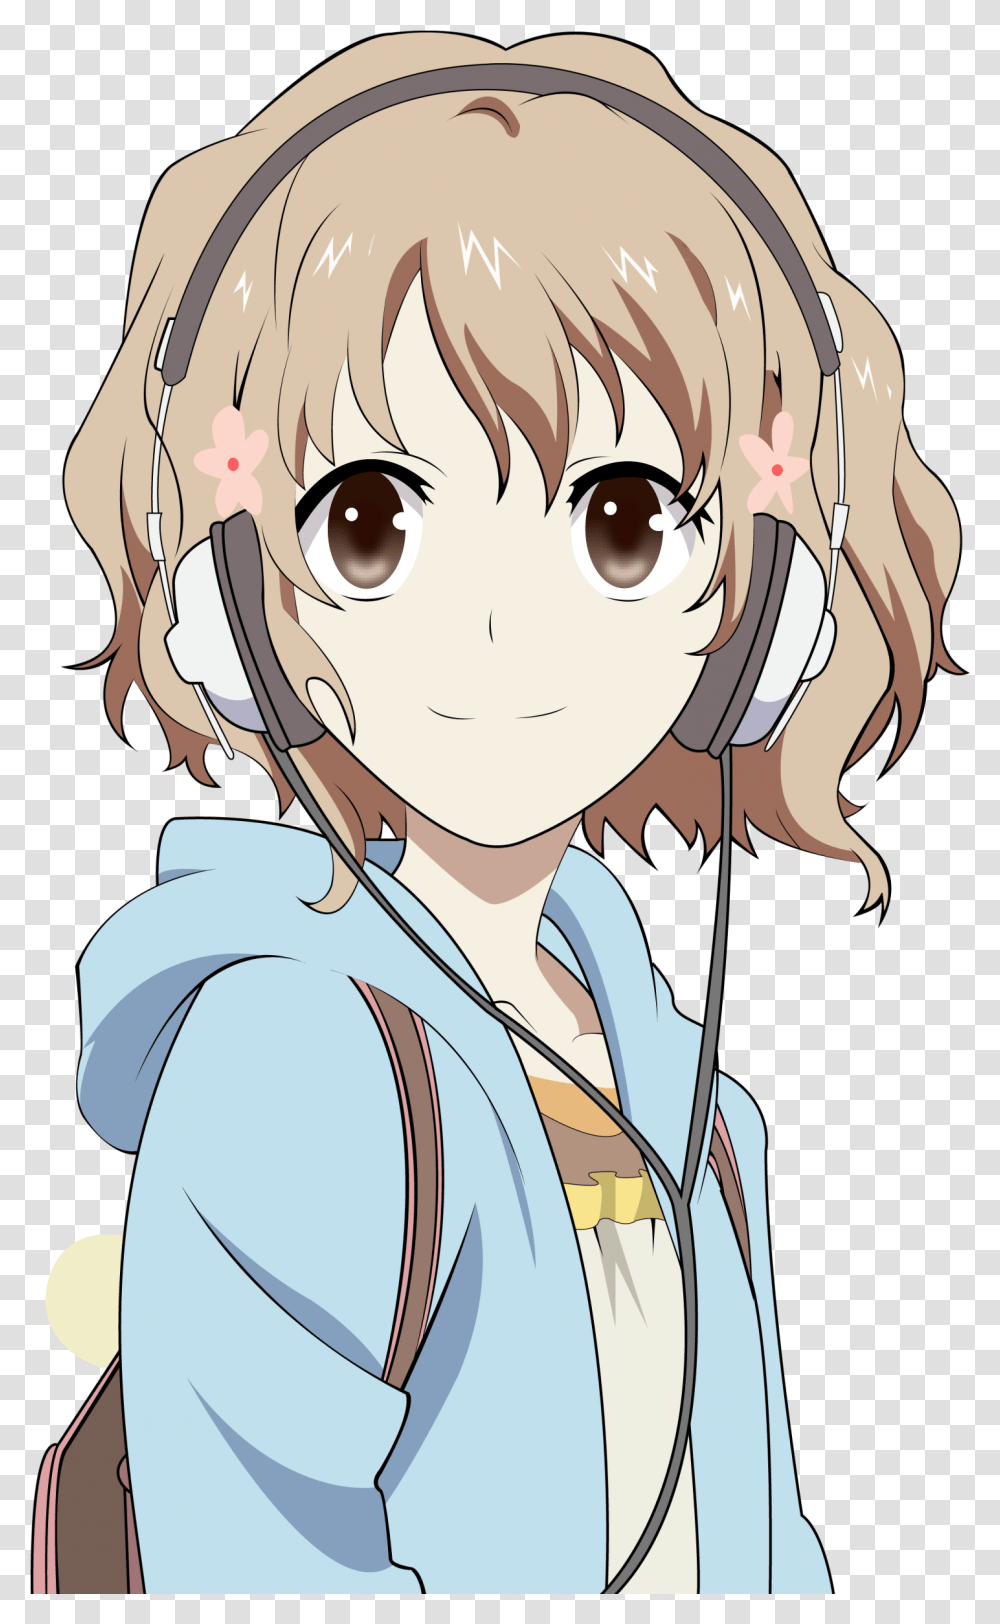 Download Anime Girl With Short Blonde Hair Anime Girls With Short Blonde Hair, Manga Transparent Png